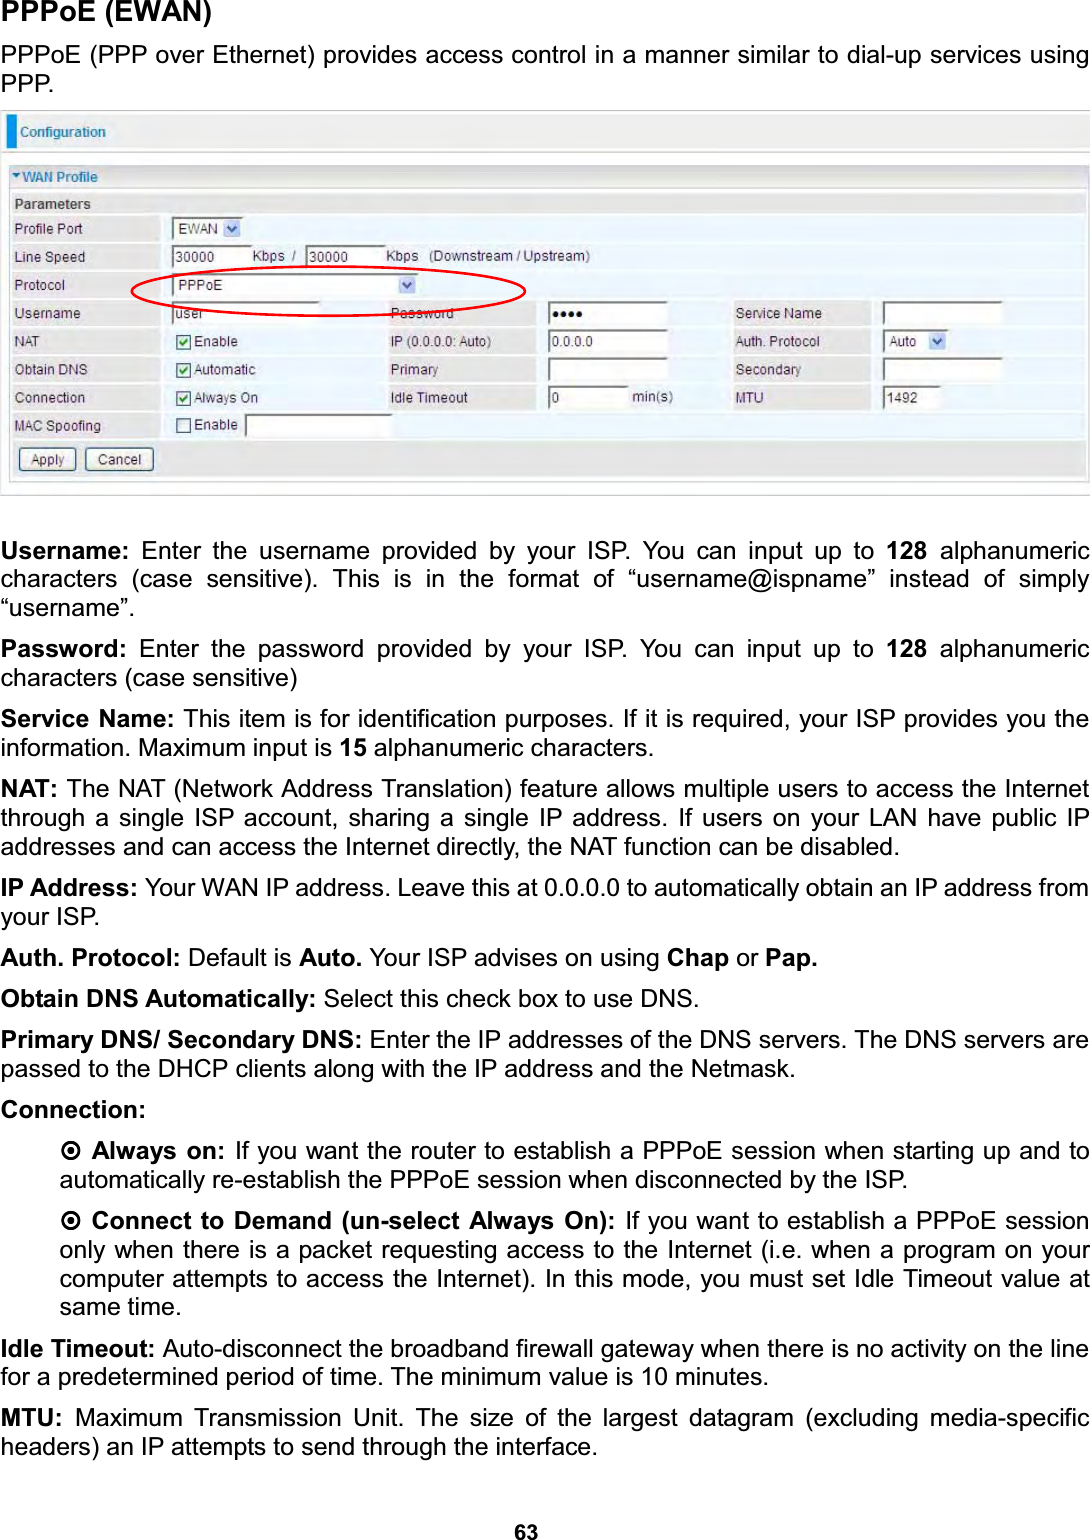  63   PPPoE (EWAN) PPPoE (PPP over Ethernet) provides access control in a manner similar to dial-up services using PPP.   Username: Enter the username provided by your ISP. You can input up to 128  alphanumeric characters (case sensitive). This is in the format of “username@ispname” instead of simply “username”. Password: Enter the password provided by your ISP. You can input up to 128 alphanumeric characters (case sensitive) Service Name: This item is for identification purposes. If it is required, your ISP provides you the information. Maximum input is 15 alphanumeric characters. NAT: The NAT (Network Address Translation) feature allows multiple users to access the Internet through a single ISP account, sharing a single IP address. If users on your LAN have public IP addresses and can access the Internet directly, the NAT function can be disabled. IP Address: Your WAN IP address. Leave this at 0.0.0.0 to automatically obtain an IP address from your ISP. Auth. Protocol: Default is Auto. Your ISP advises on using Chap or Pap. Obtain DNS Automatically: Select this check box to use DNS. Primary DNS/ Secondary DNS: Enter the IP addresses of the DNS servers. The DNS servers are passed to the DHCP clients along with the IP address and the Netmask. Connection:   Always on: If you want the router to establish a PPPoE session when starting up and to automatically re-establish the PPPoE session when disconnected by the ISP.  Connect to Demand (un-select Always On): If you want to establish a PPPoE session only when there is a packet requesting access to the Internet (i.e. when a program on your computer attempts to access the Internet). In this mode, you must set Idle Timeout value at same time. Idle Timeout: Auto-disconnect the broadband firewall gateway when there is no activity on the line for a predetermined period of time. The minimum value is 10 minutes. MTU:  Maximum Transmission Unit. The size of the largest datagram (excluding media-specific headers) an IP attempts to send through the interface. 